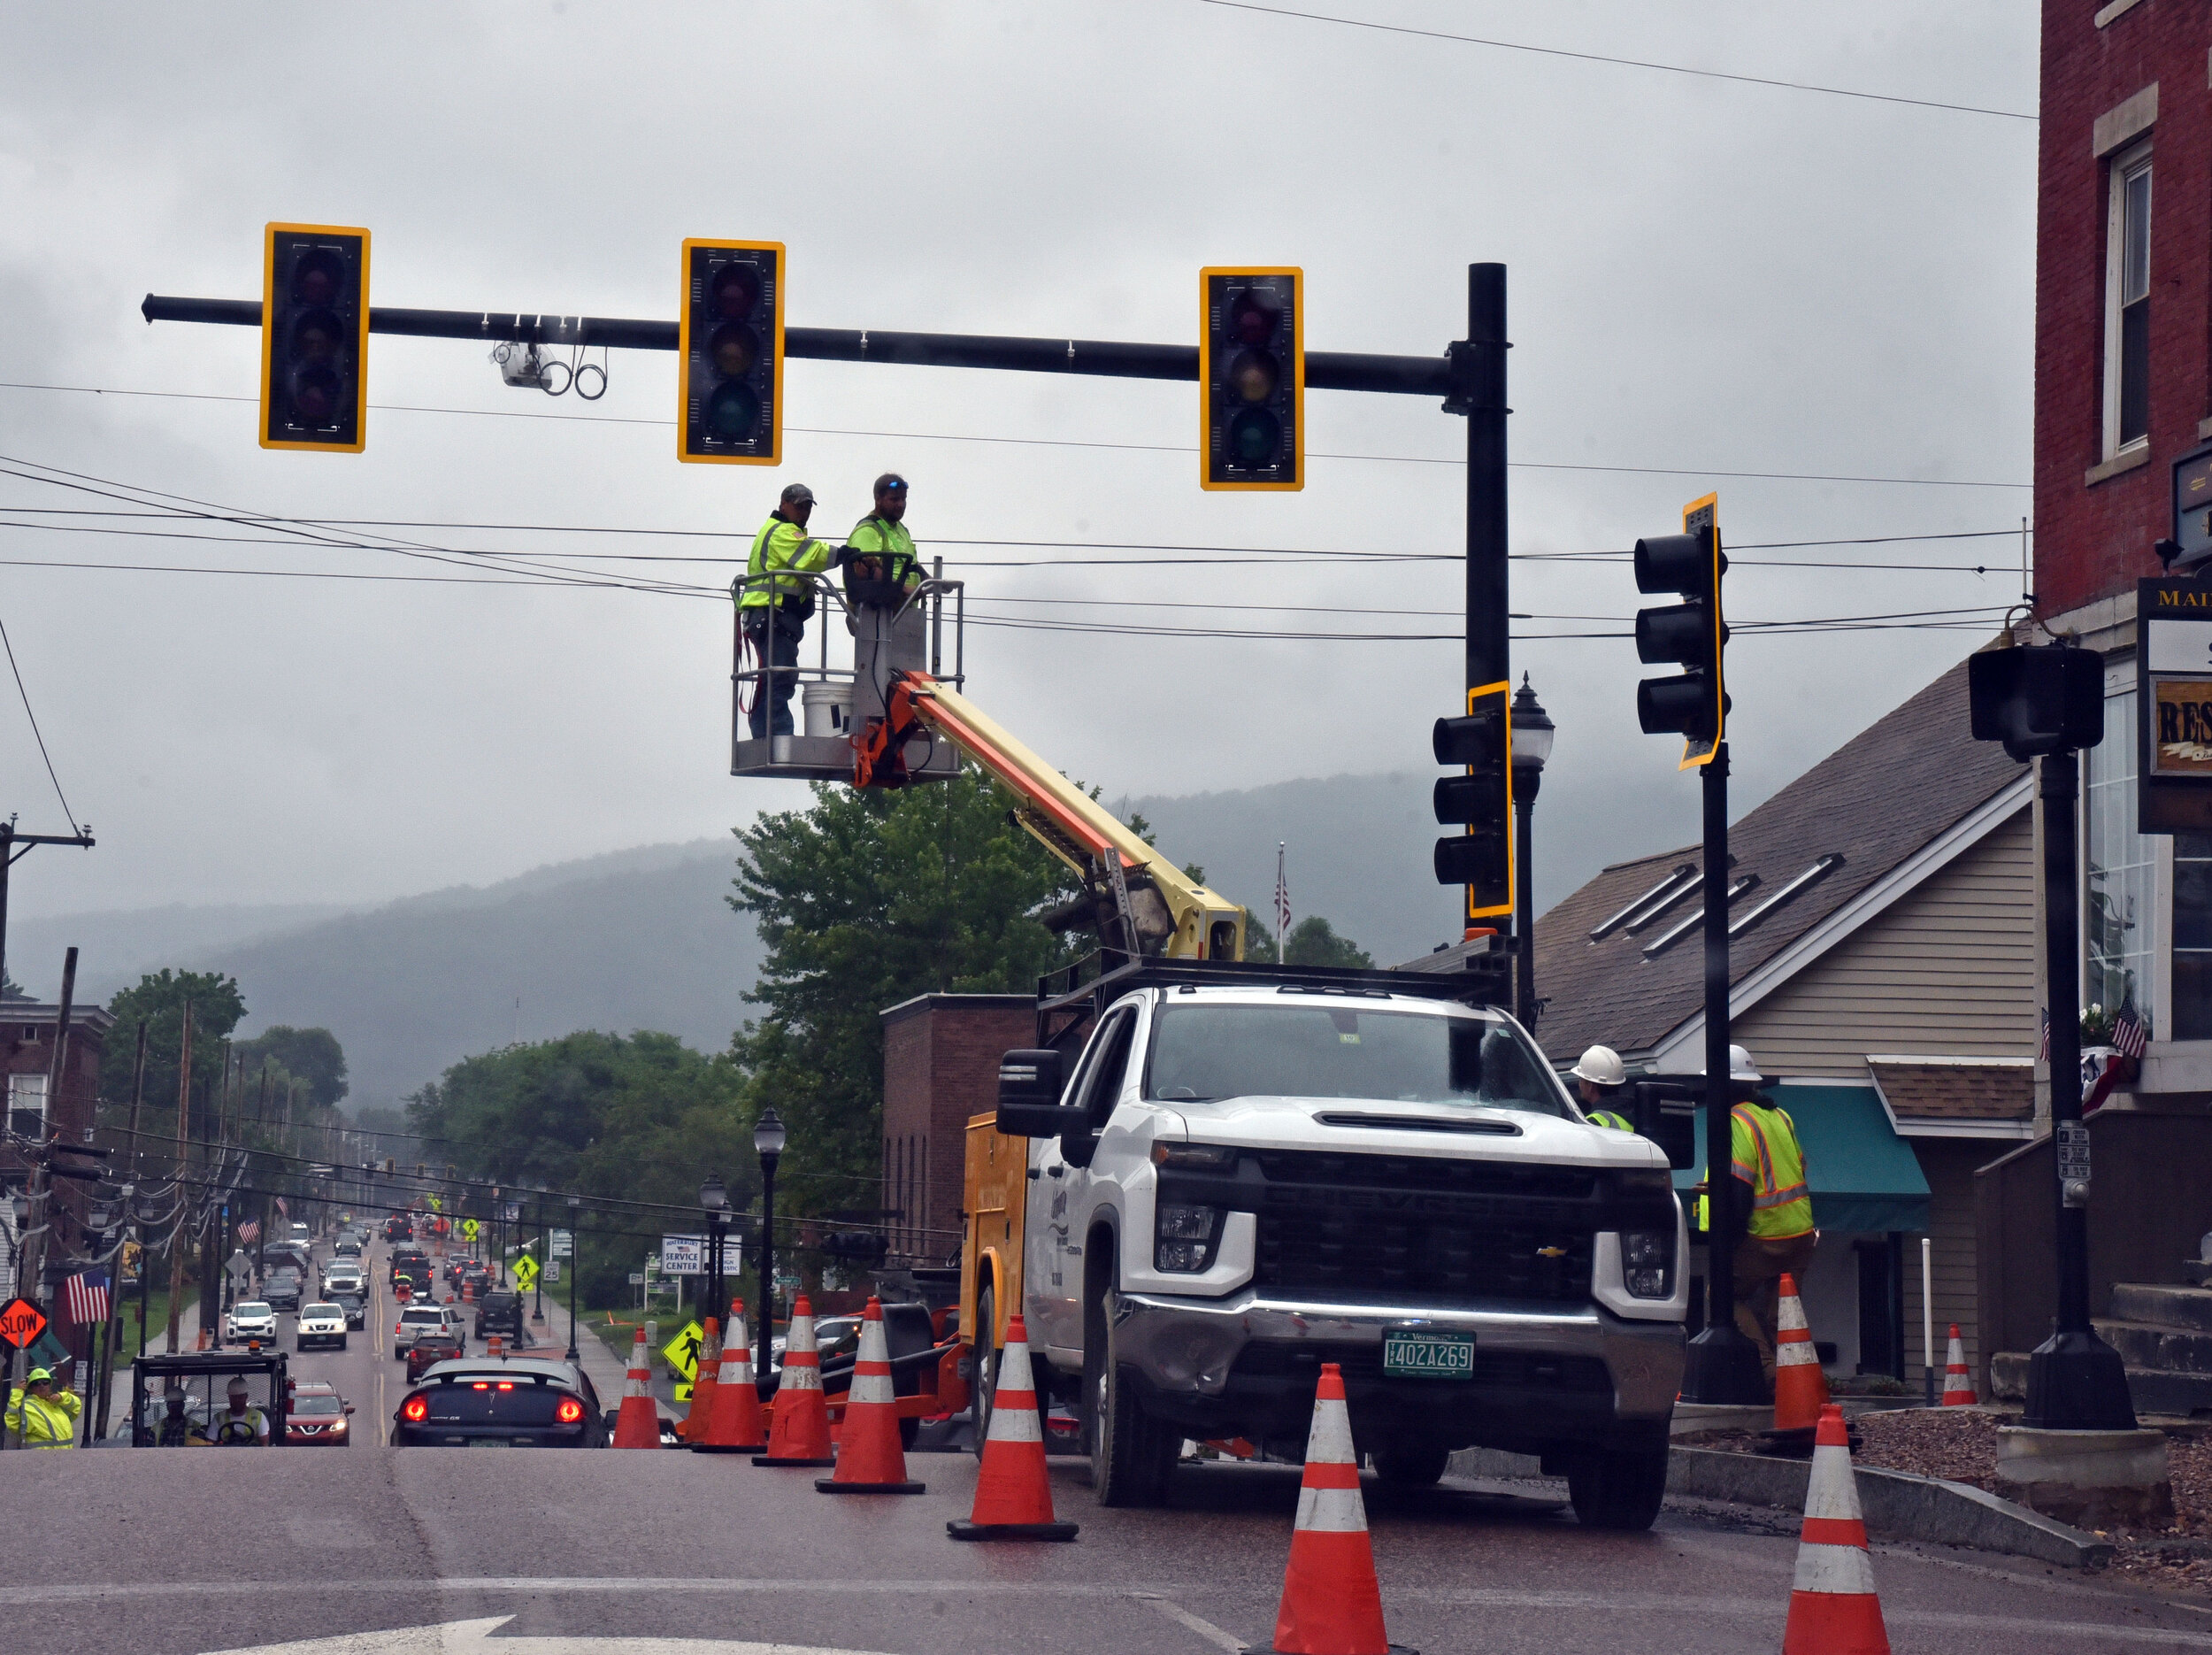   Traffic moves along and around workers making final adjustments to the traffic signals at the Main and Winooski Street intersection. Photo by Gordon Miller  